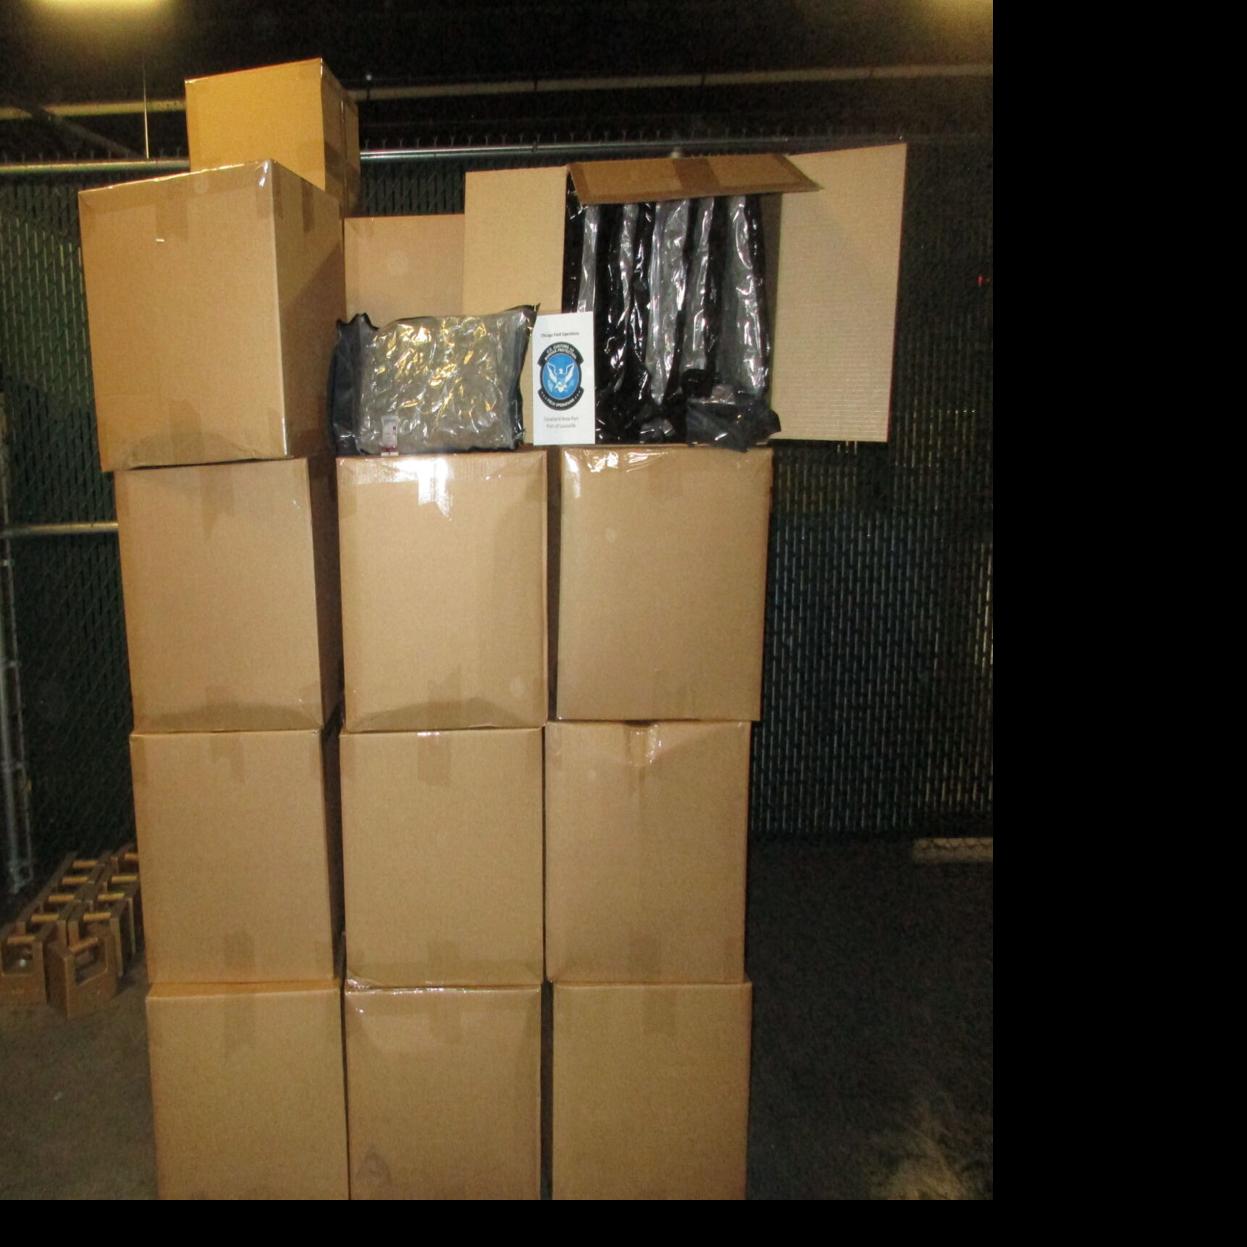 Feds seize more than $4.4 million in counterfeit jewelry at UPS Worldport  in Louisville, Crime Reports